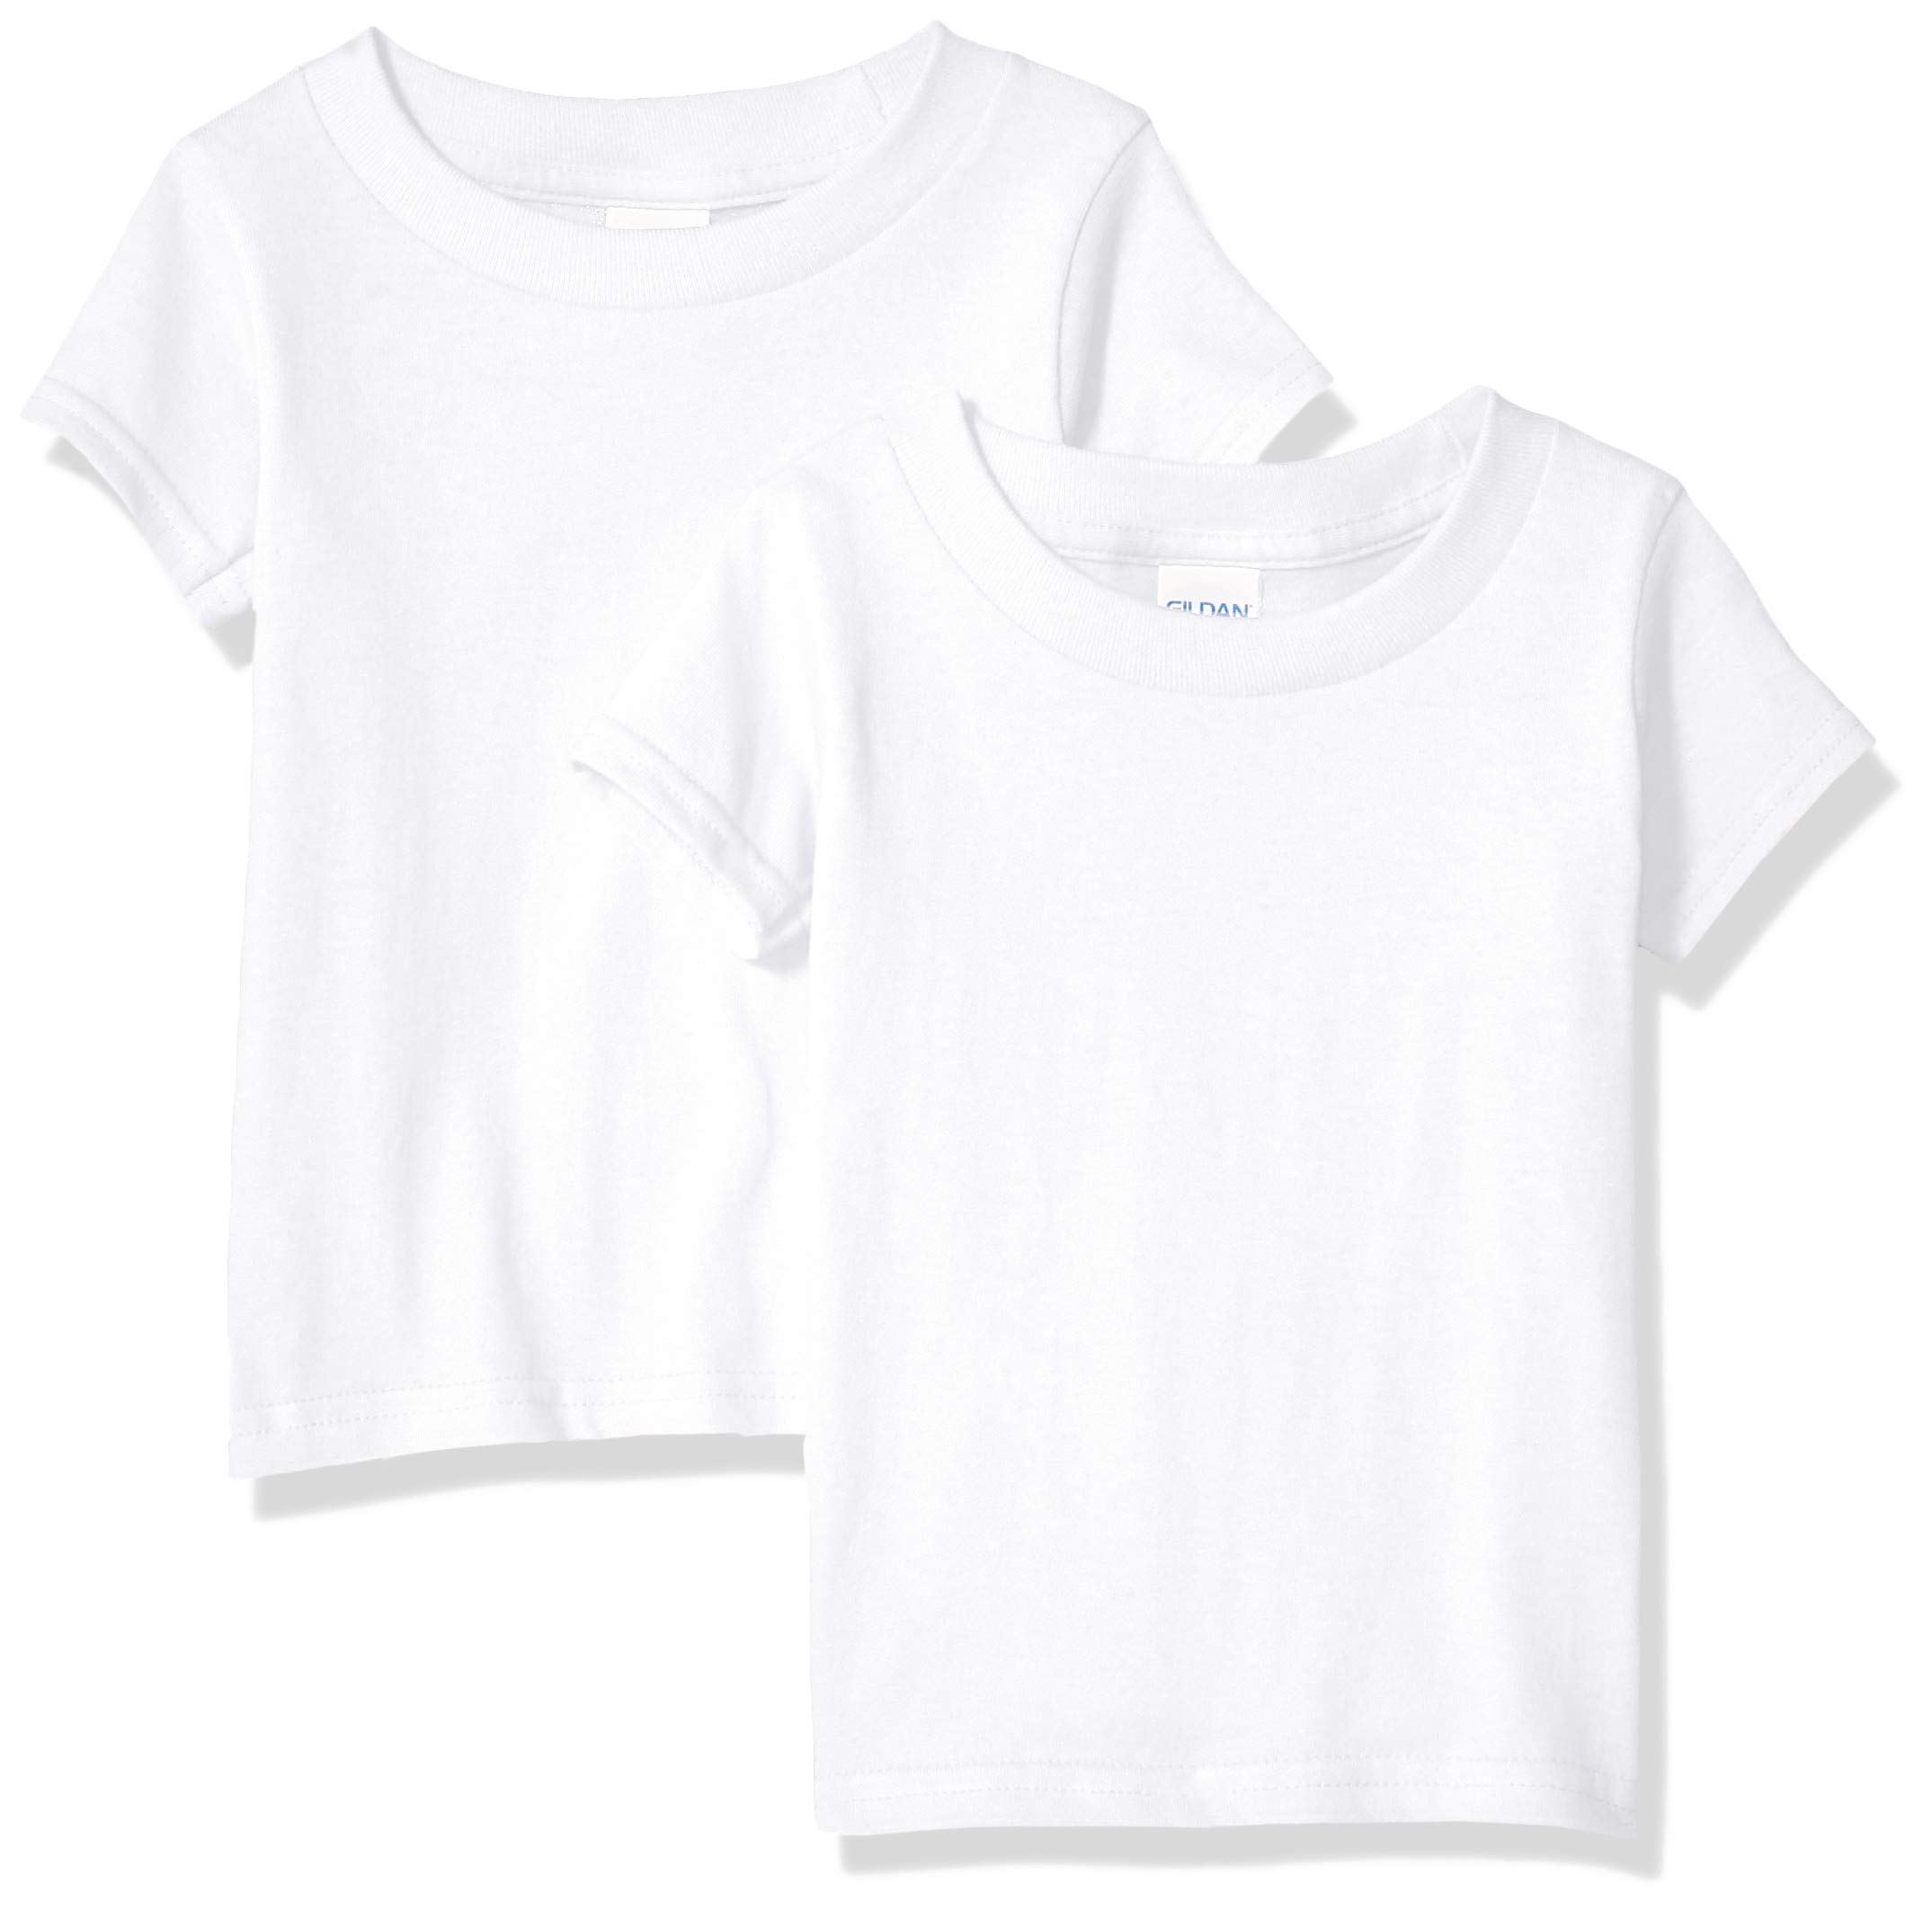 Gildan Youth Toddler T-Shirt, Style G5100P, 2-Pack